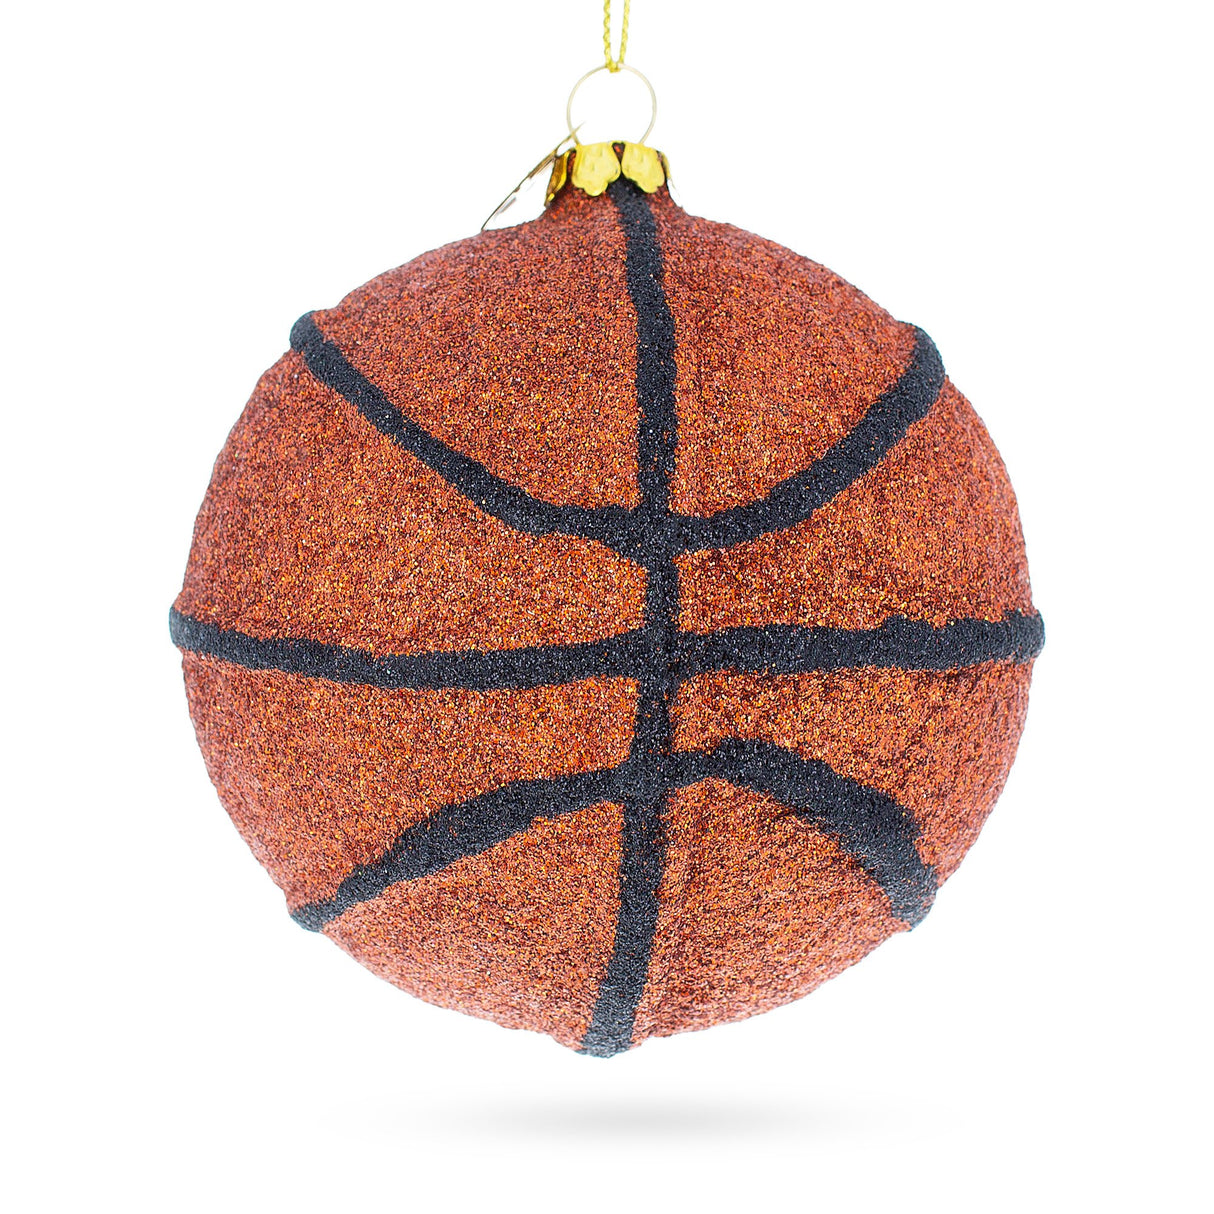 Slam-Dunk Basketball - Blown Glass Christmas Ornament in Orange color, Round shape